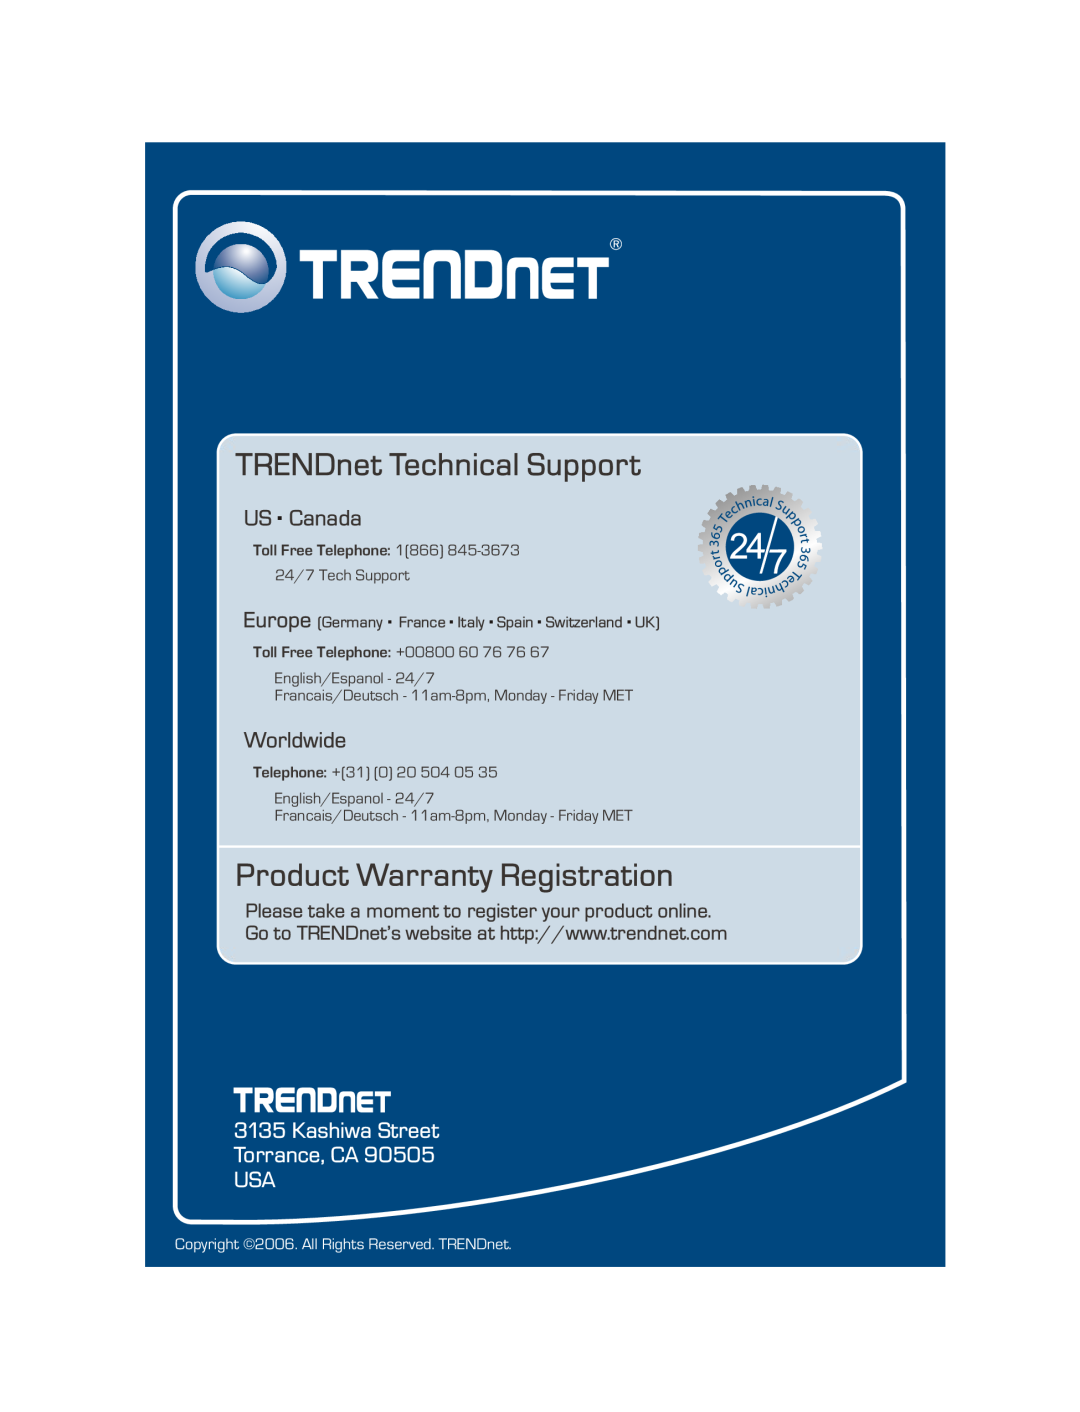 TRENDnet Utility CD-ROM, TPE-224WS manual TRENDnet Technical Support, Product Warranty Registration, US . Canada, Worldwide 